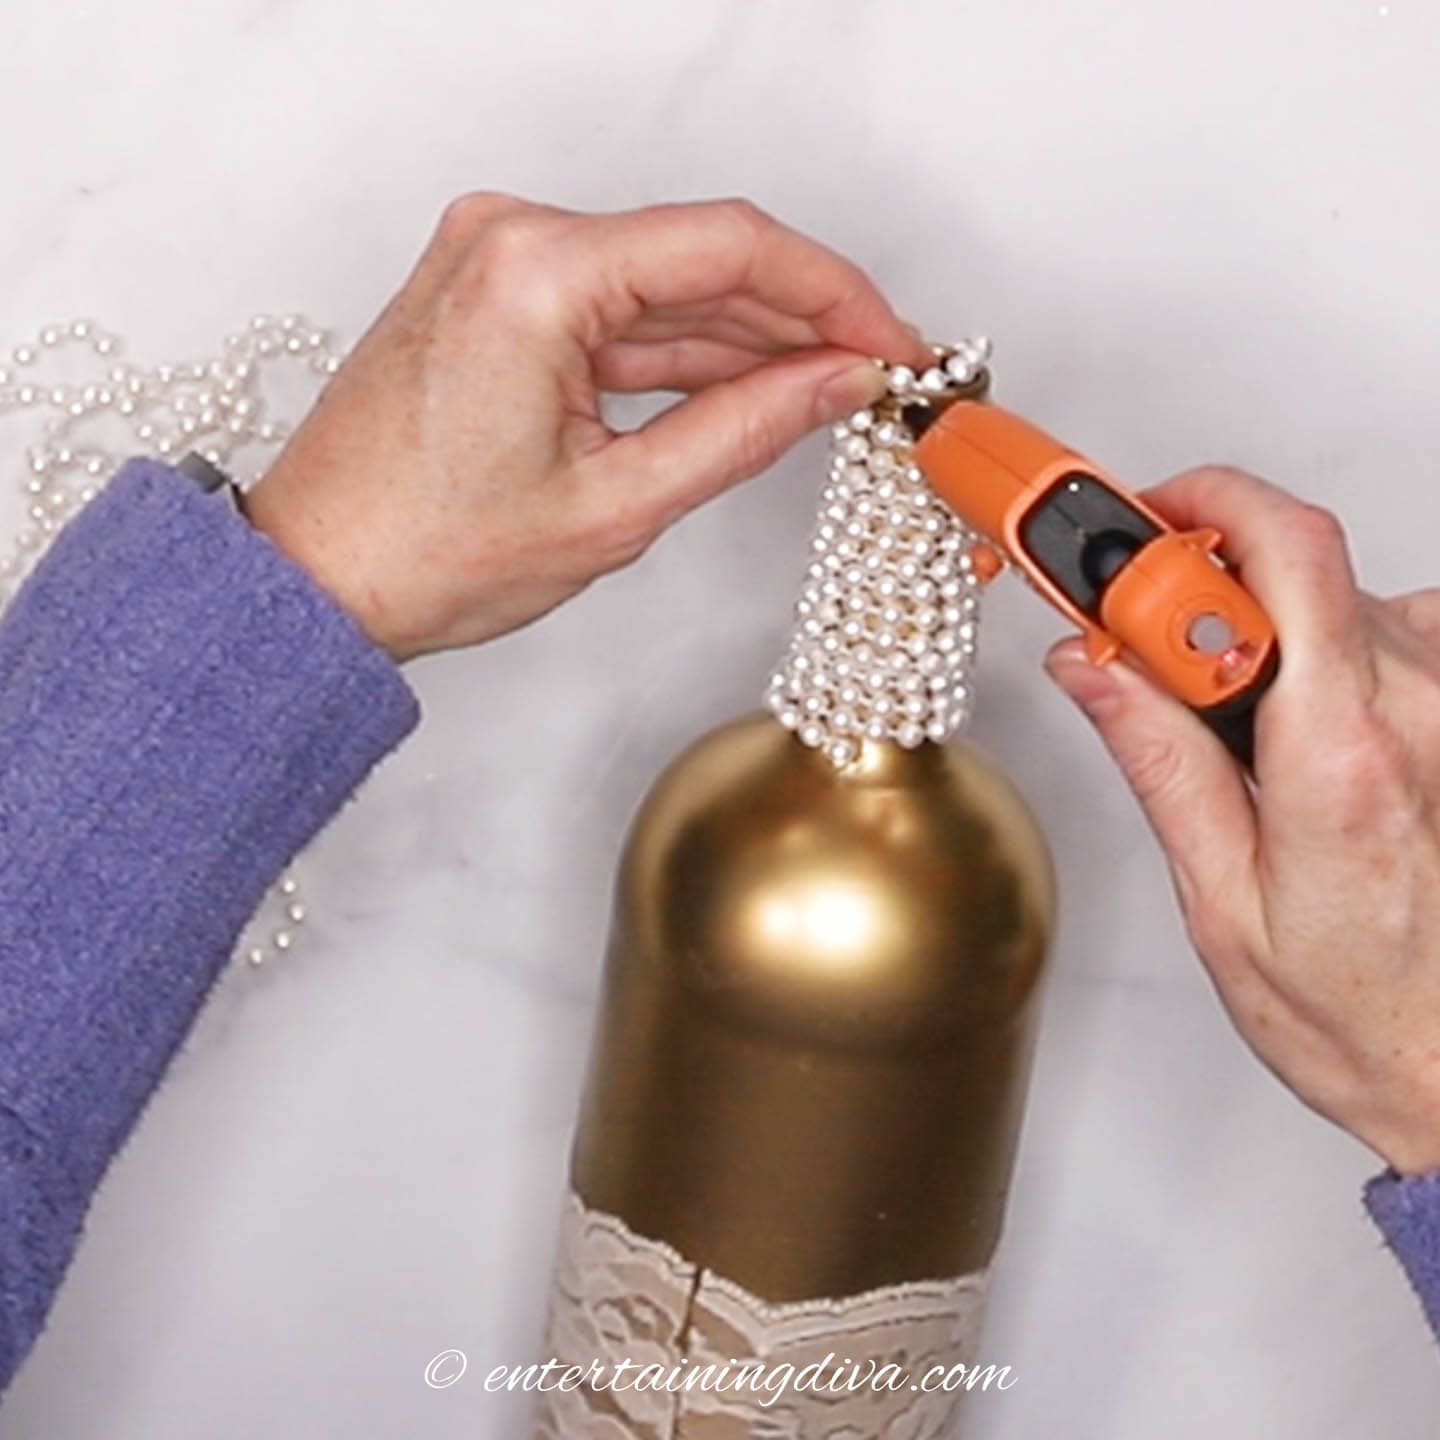 The end of a string of pearls being attached to the top of a wine bottle with a glue gun